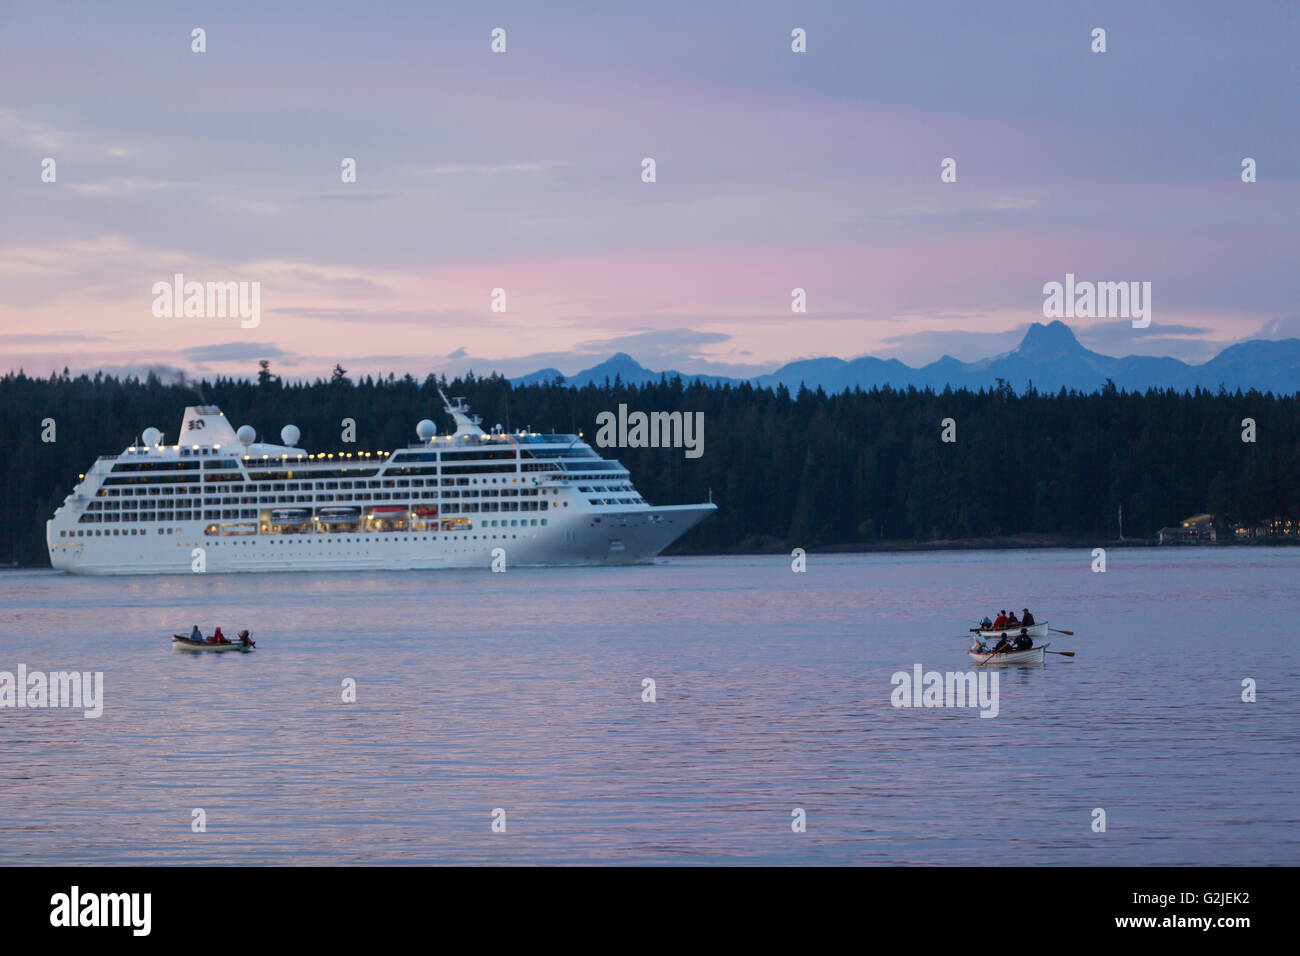 Anglers row in Tyee Pool Salmon while a Princess Line Cruiseship transits waters sharing Discovery Passage them  Discovery Stock Photo